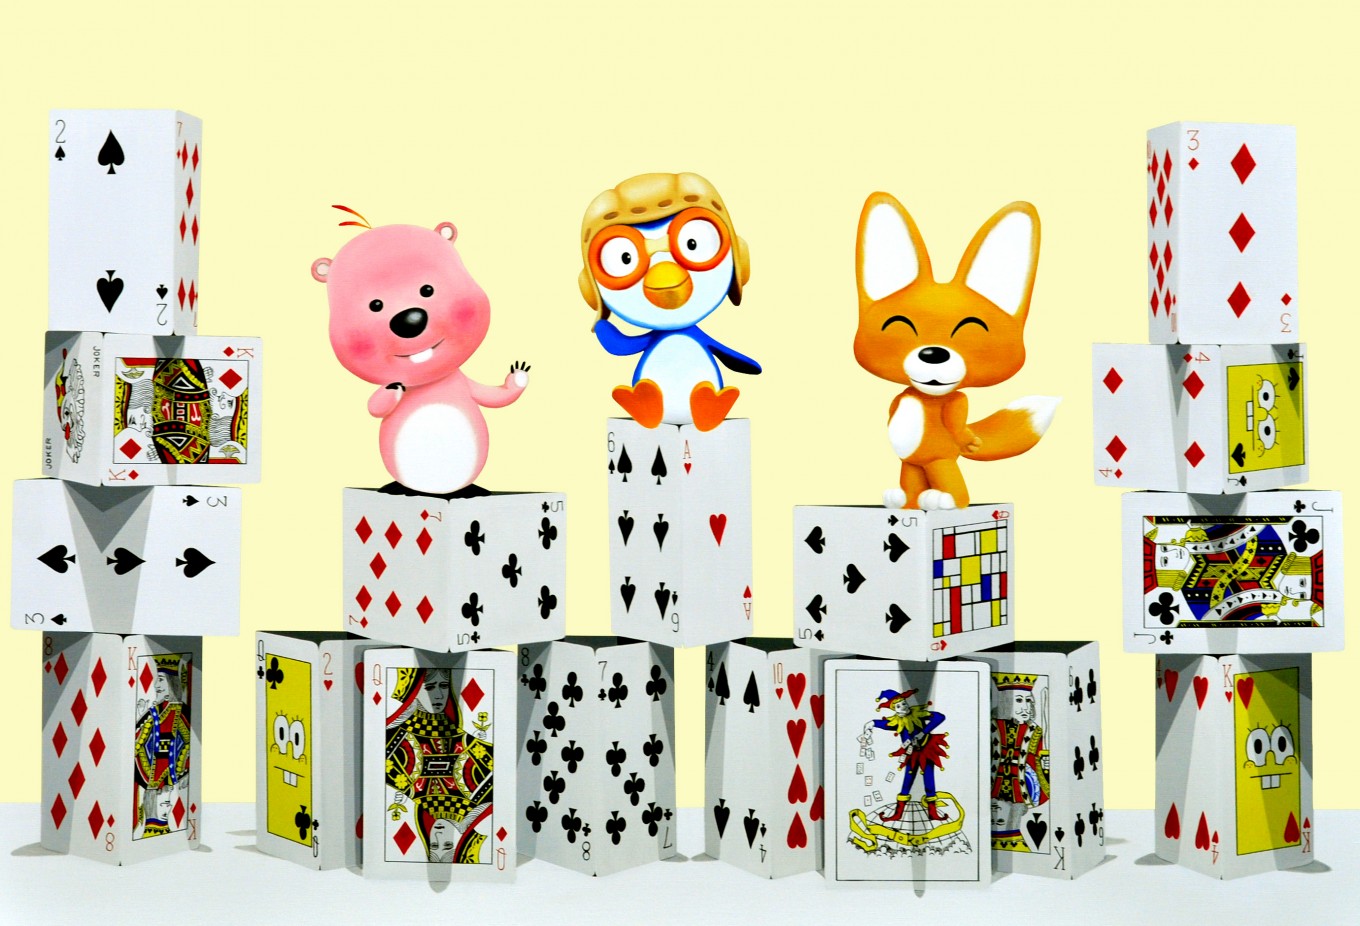 The tower of card - pororo friends_116.7x80.3cm oil on canvas 2015